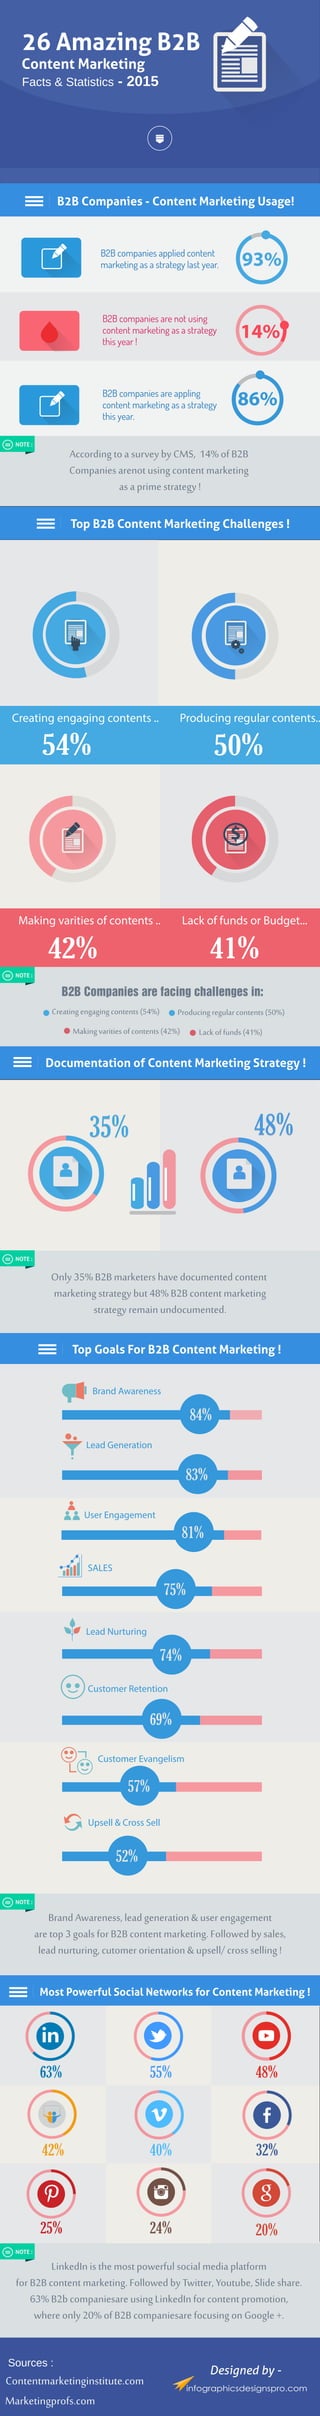 26 Amazing B2B 
Content Marketing 
Facts & Statistics - 2015 
B2B Companies - Content Marketing Usage! 
14% 
According to a survey by CMS, 14% of B2B 
Companies arenot using content marketing 
as a prime strategy ! 
93% 
86% 
Top B2B Content Marketing Challenges ! 
NOTE : 
Creating engaging contents .. 
Producing regular contents.. 
50% 
54% 
$ 
Making varities of contents .. Lack of funds or Budget... 
42% 41% 
Documentation of Content Marketing Strategy ! 
35% 48% 
Only 35% B2B marketers have documented content 
marketing strategy but 48% B2B content marketing 
strategy remain undocumented. 
Top Goals For B2B Content Marketing ! 
84% 
83% 
Brand Awareness 
Lead Generation 
81% 
User Engagement 
75% 
SALES 
Lead Nurturing 
74% 
Customer Retention 
69% 
Customer Evangelism 
57% 
Upsell & Cross Sell 
52% 
Brand Awareness, lead generation & user engagement 
are top 3 goals for B2B content marketing. Followed by sales, 
lead nurturing, cutomer orientation & upsell/ cross selling ! 
Most Powerful Social Networks for Content Marketing ! 
63% 55% 48% 
40% 32% 
42% 
25% 24% 20% 
LinkedIn is the most powerful social media platform 
for B2B content marketing. Followed by Twitter, Youtube, Slide share. 
63% B2b companiesare using LinkedIn for content promotion, 
where only 20% of B2B companiesare focusing on Google +. 
Sources : 
Contentmarketinginstitute.com 
Marketingprofs.com 
Designed by - 
NOTE : 
NOTE : 
NOTE : 
NOTE : 
B2B Companies are facing challenges in: 
Creating engaging contents (54%) Producing regular contents (50%) 
Making varities of contents (42%) Lack of funds (41%) 
